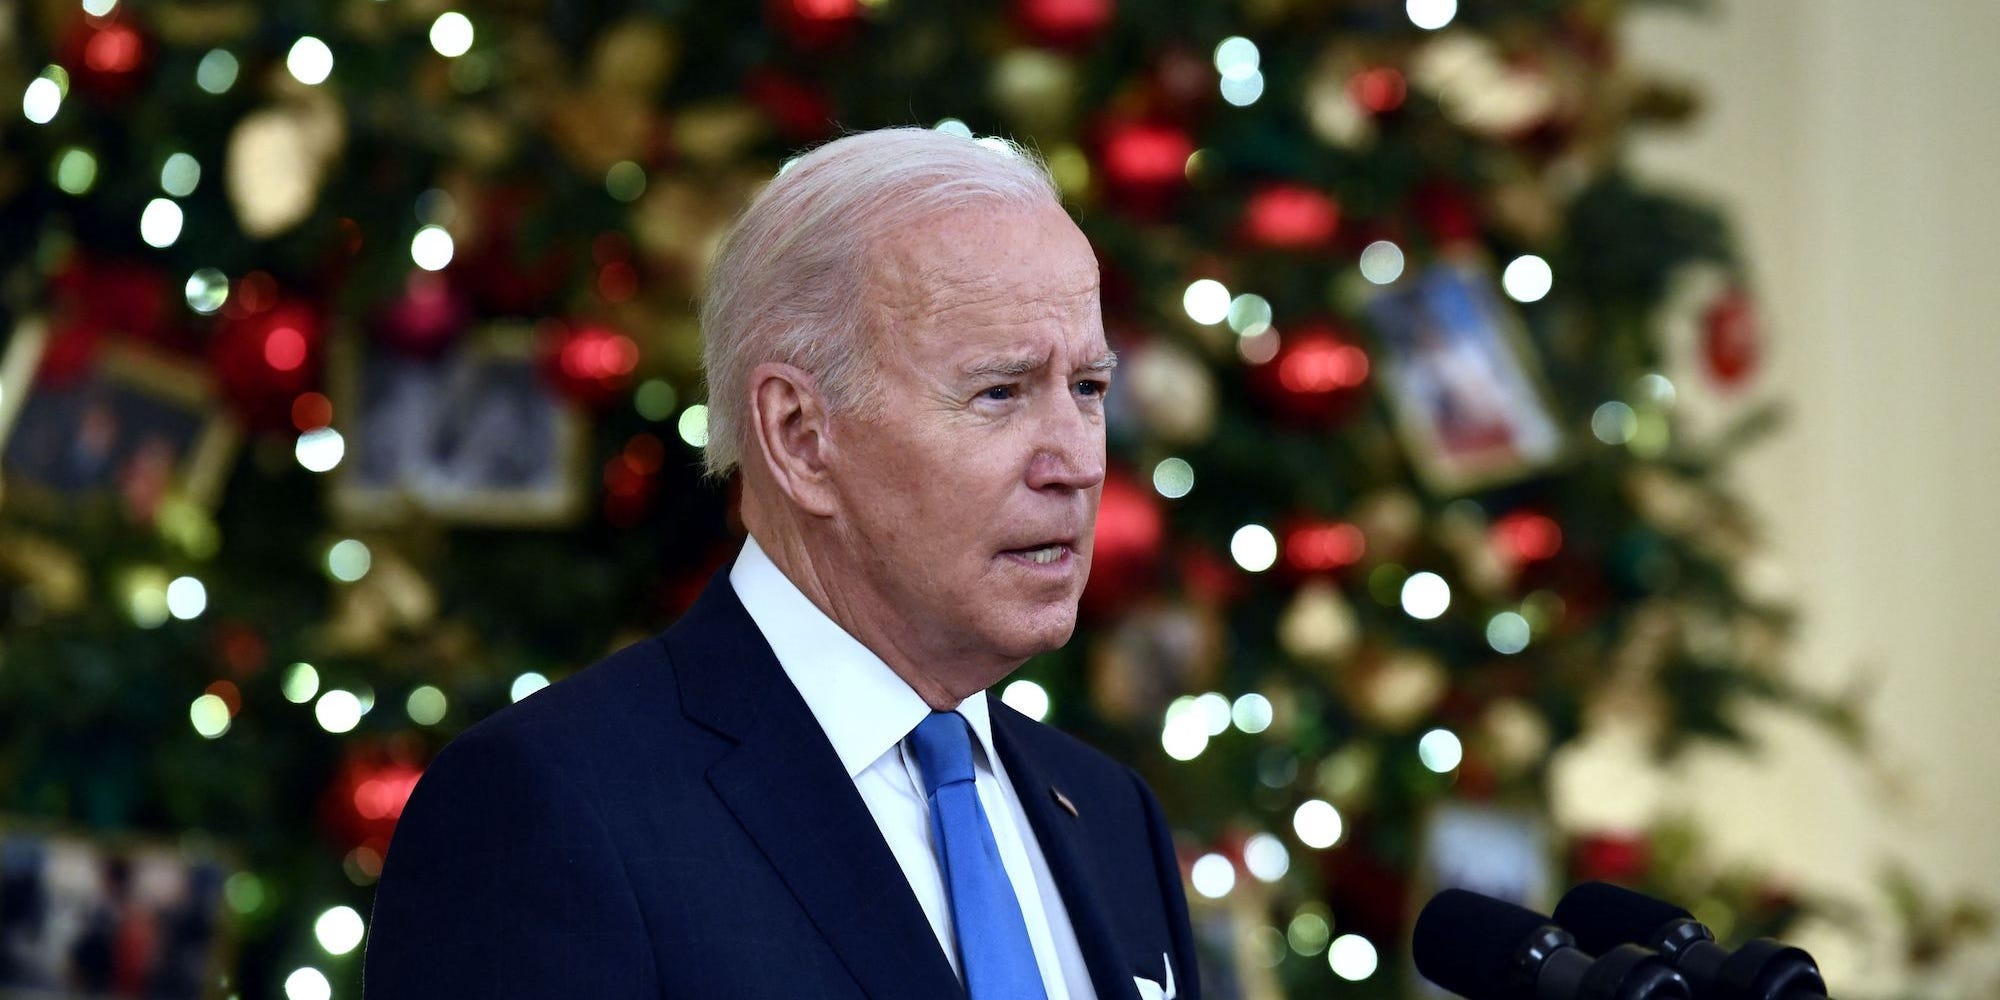 President Joe Biden speaks about the status of the country’s fight against COVID-19 and the Omicron variant at the White House on December 21, 2021.